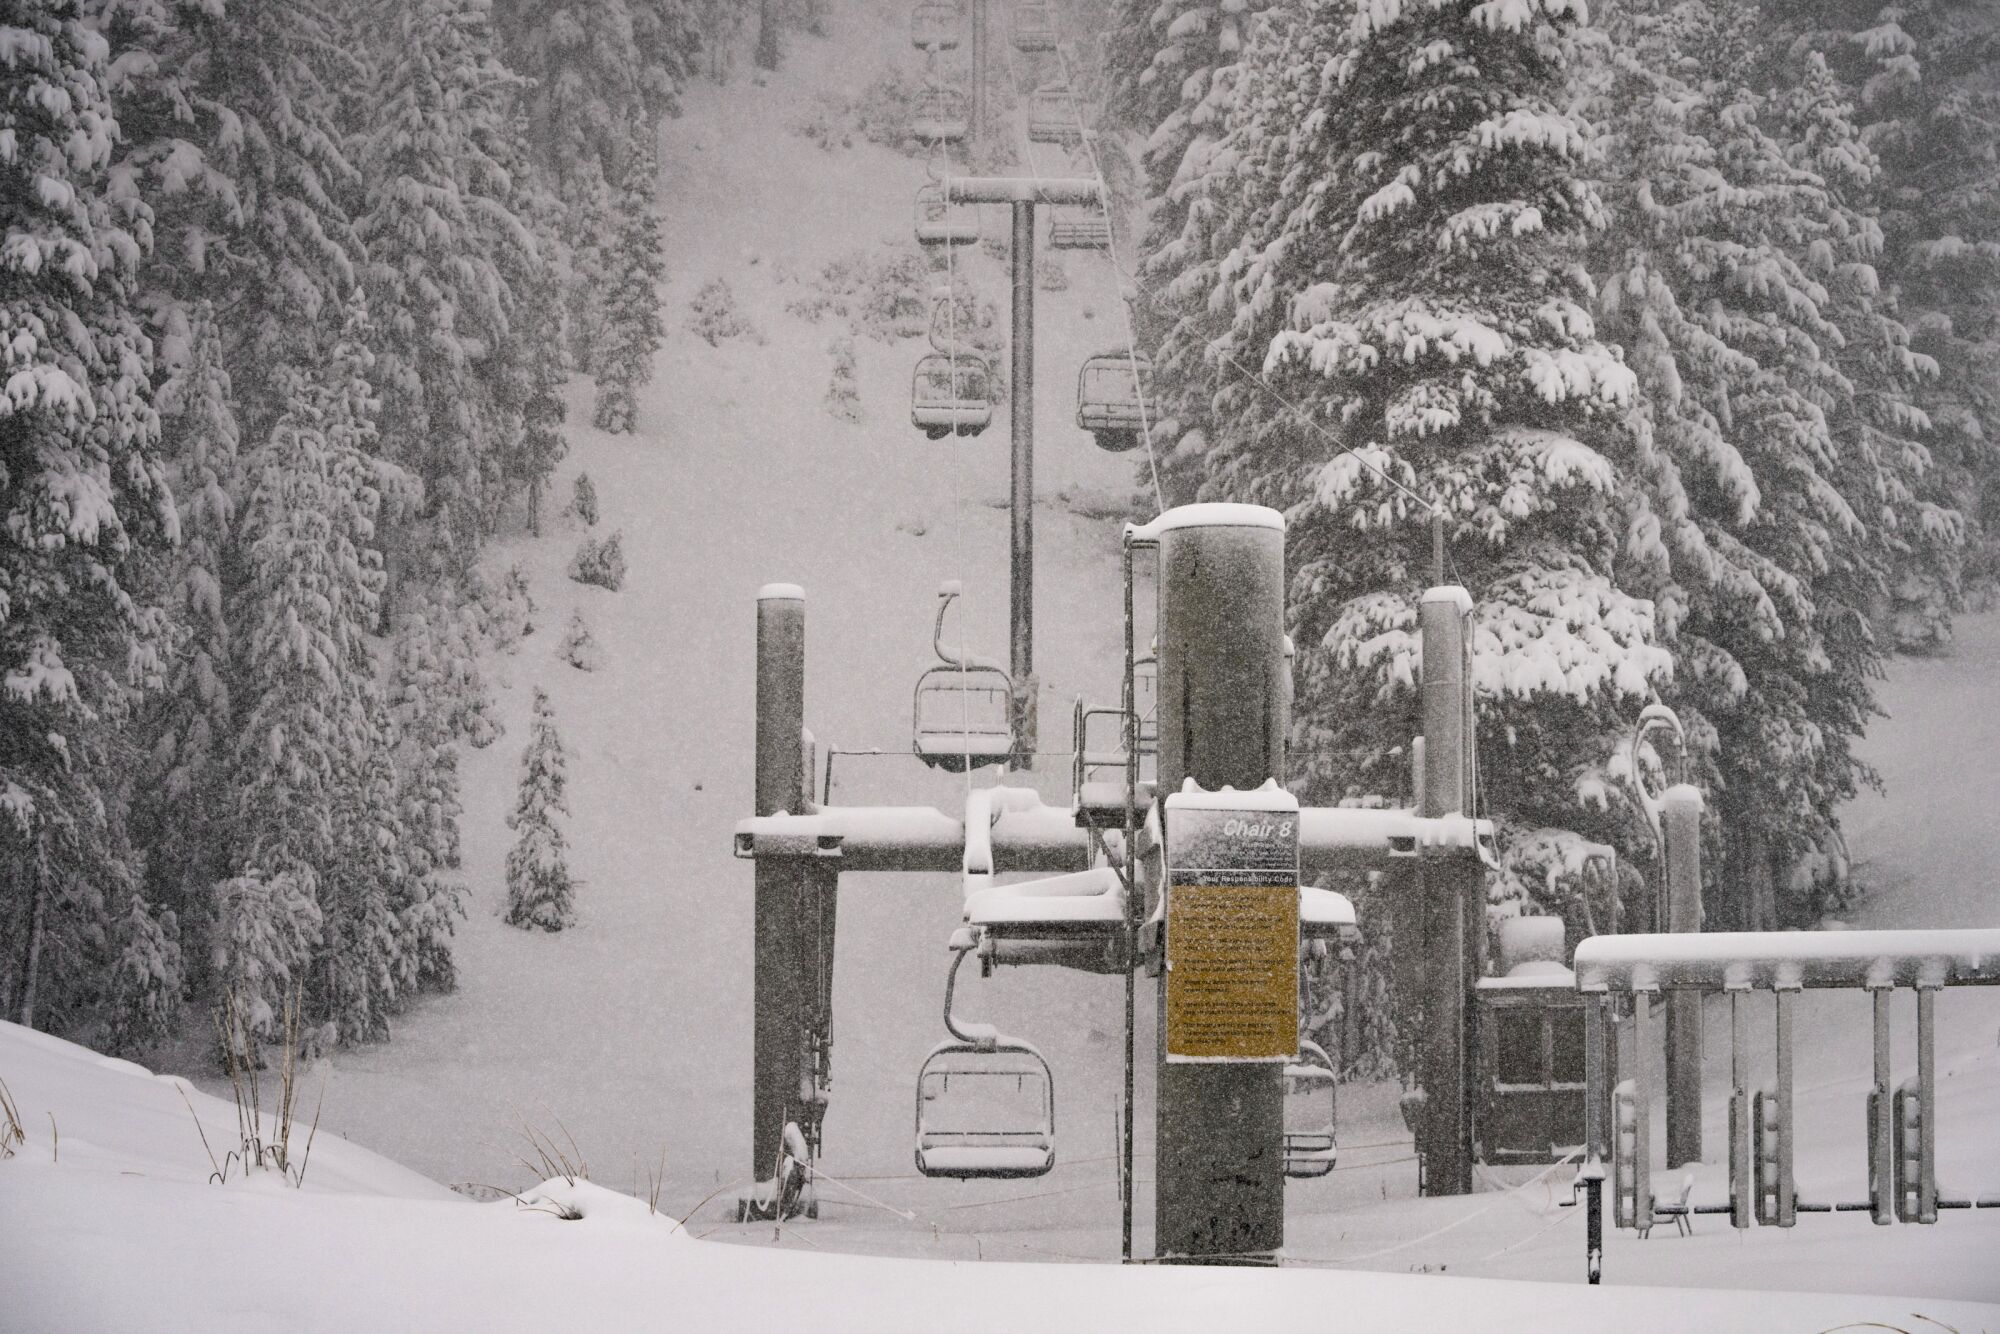 Snow falls on Mammoth Mountain on Monday in Mammoth Lakes, Calif.